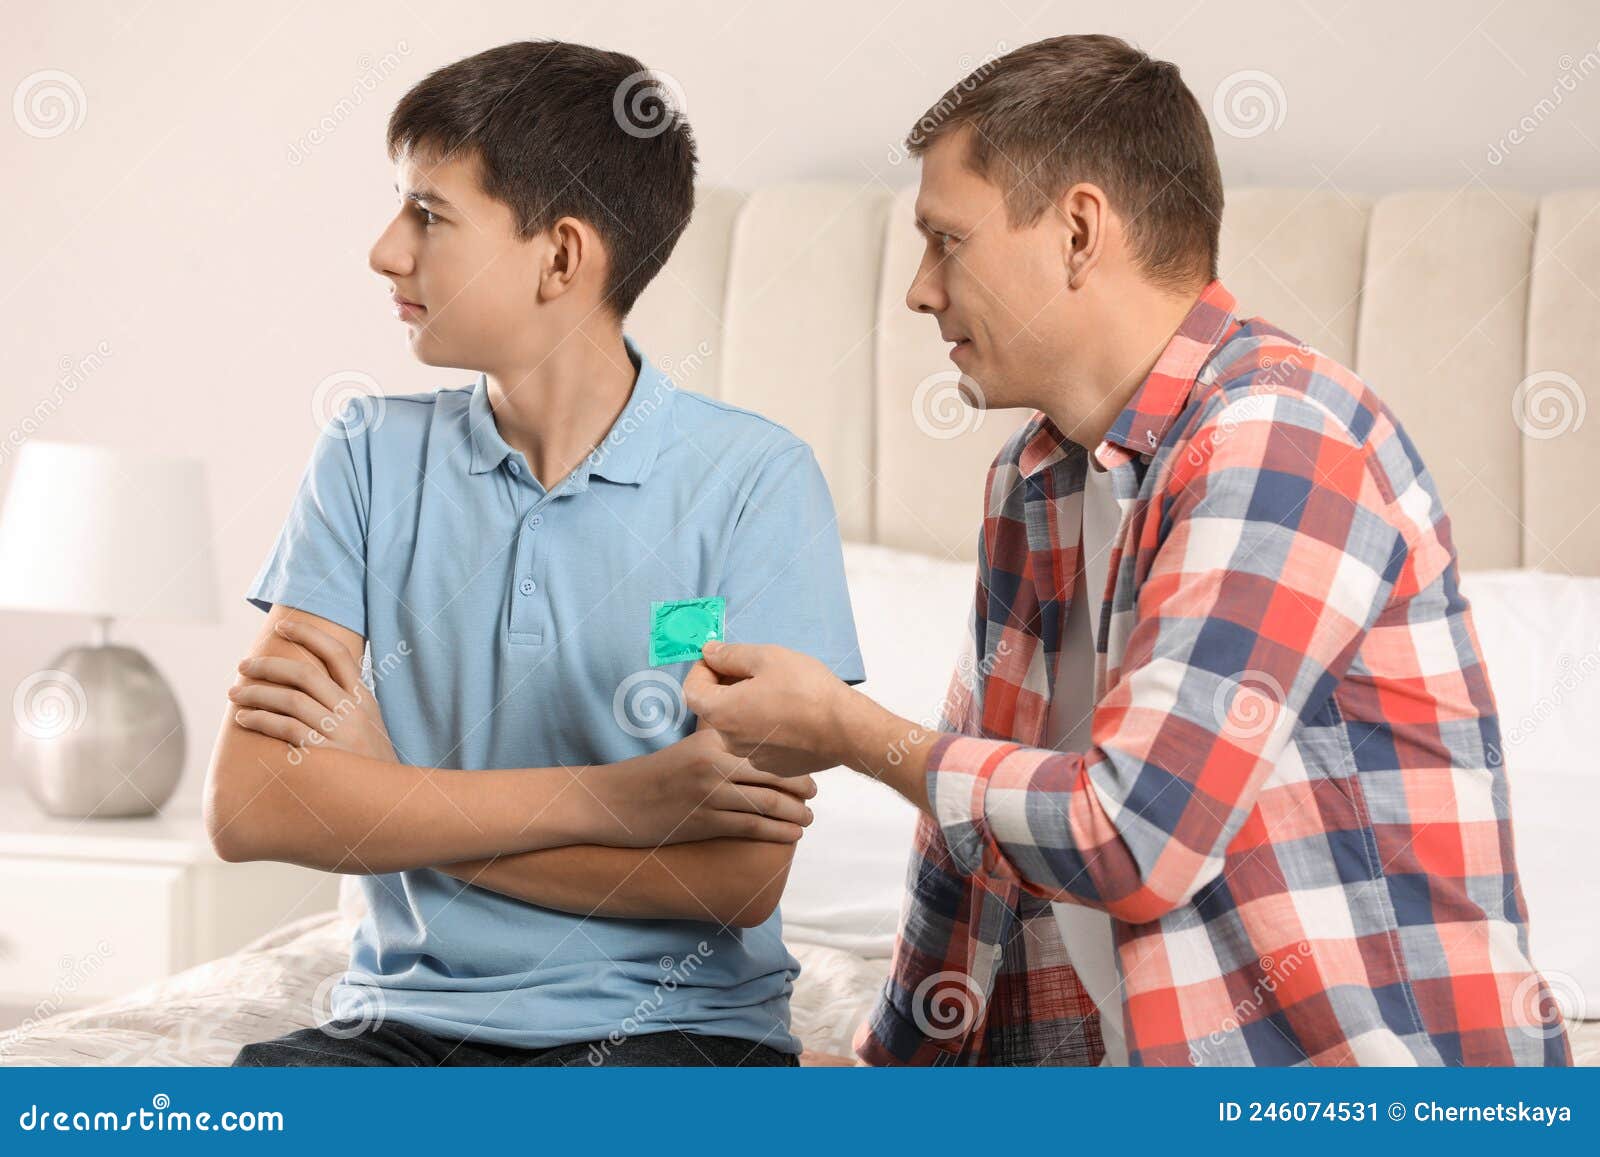 Father Giving Condom To His Teenage Son in Bedroom